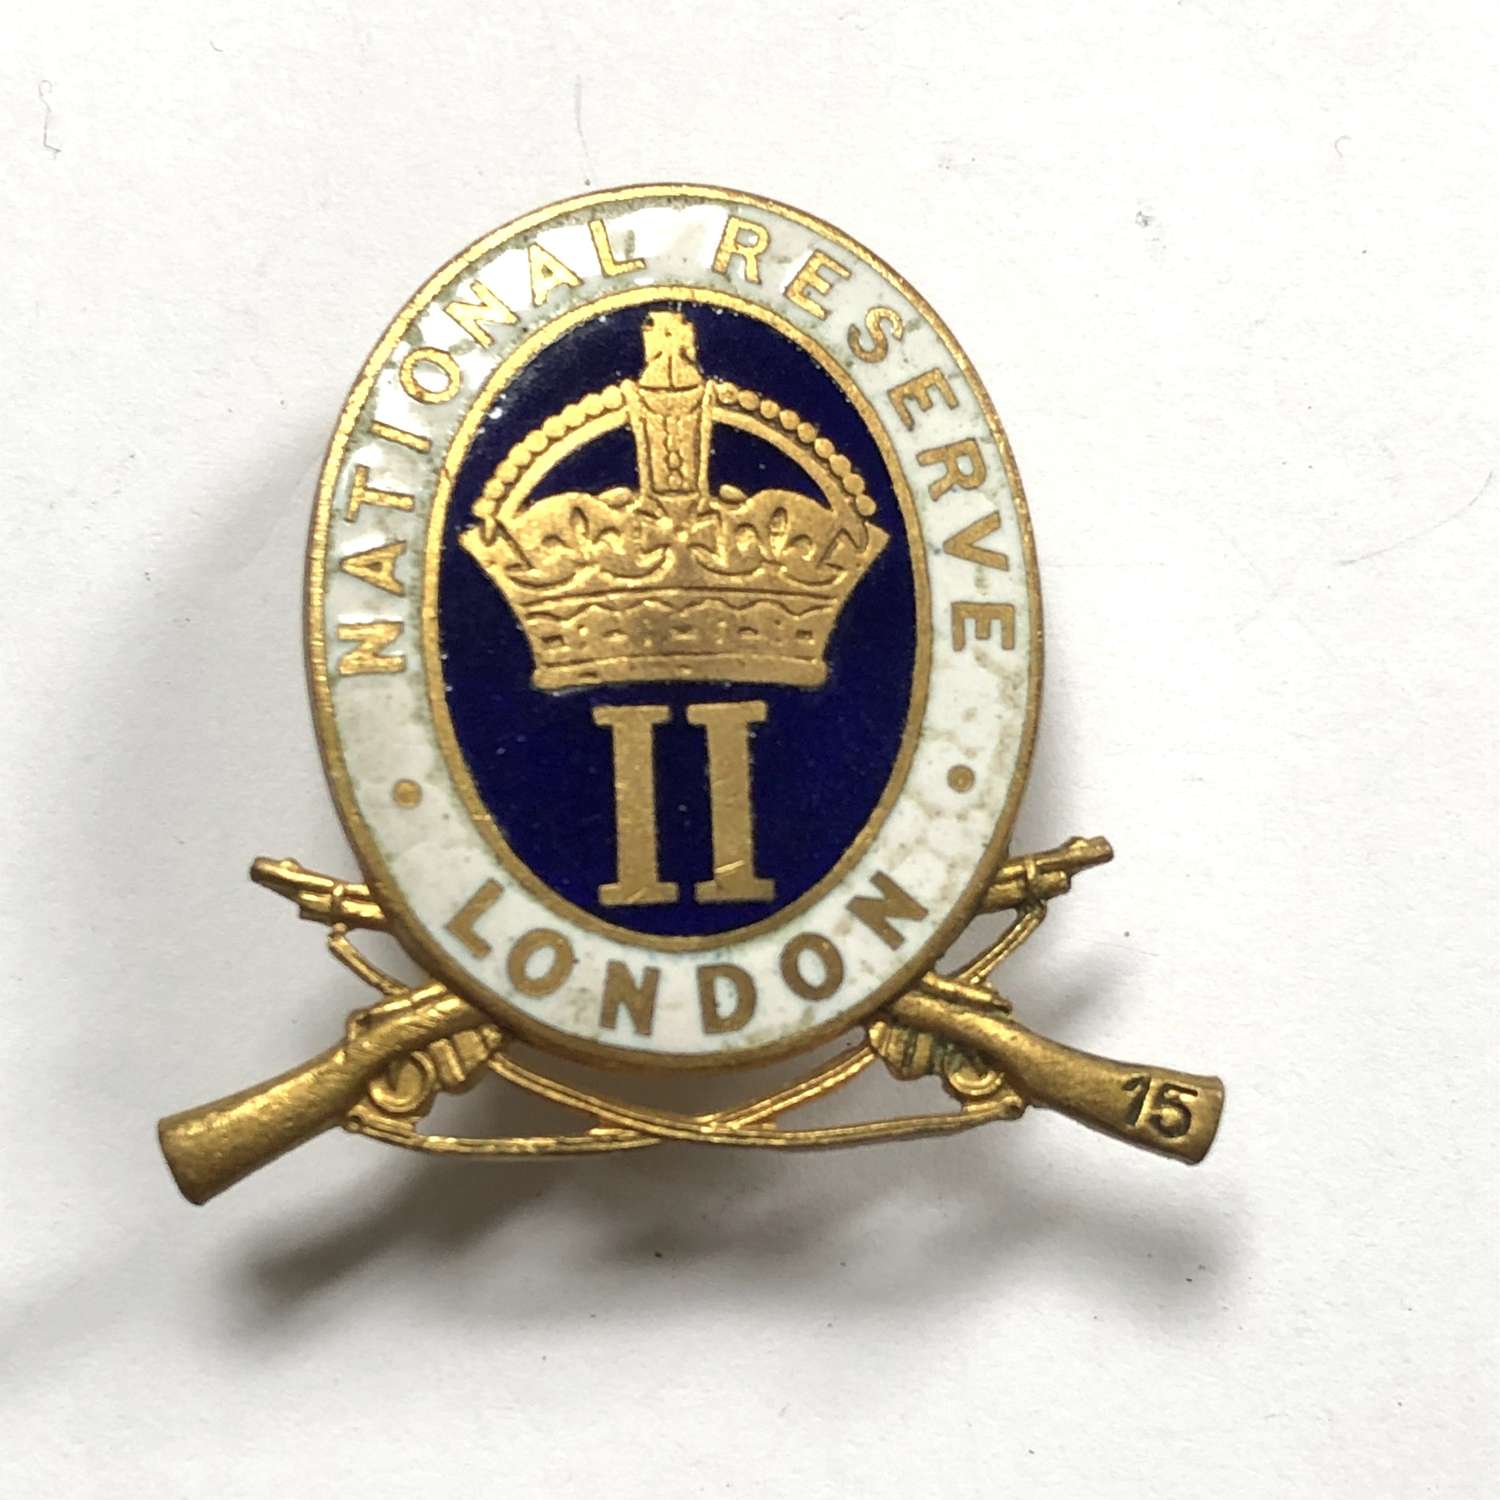 Camberwell London National Reserve enamel lapel badge by Gaunt